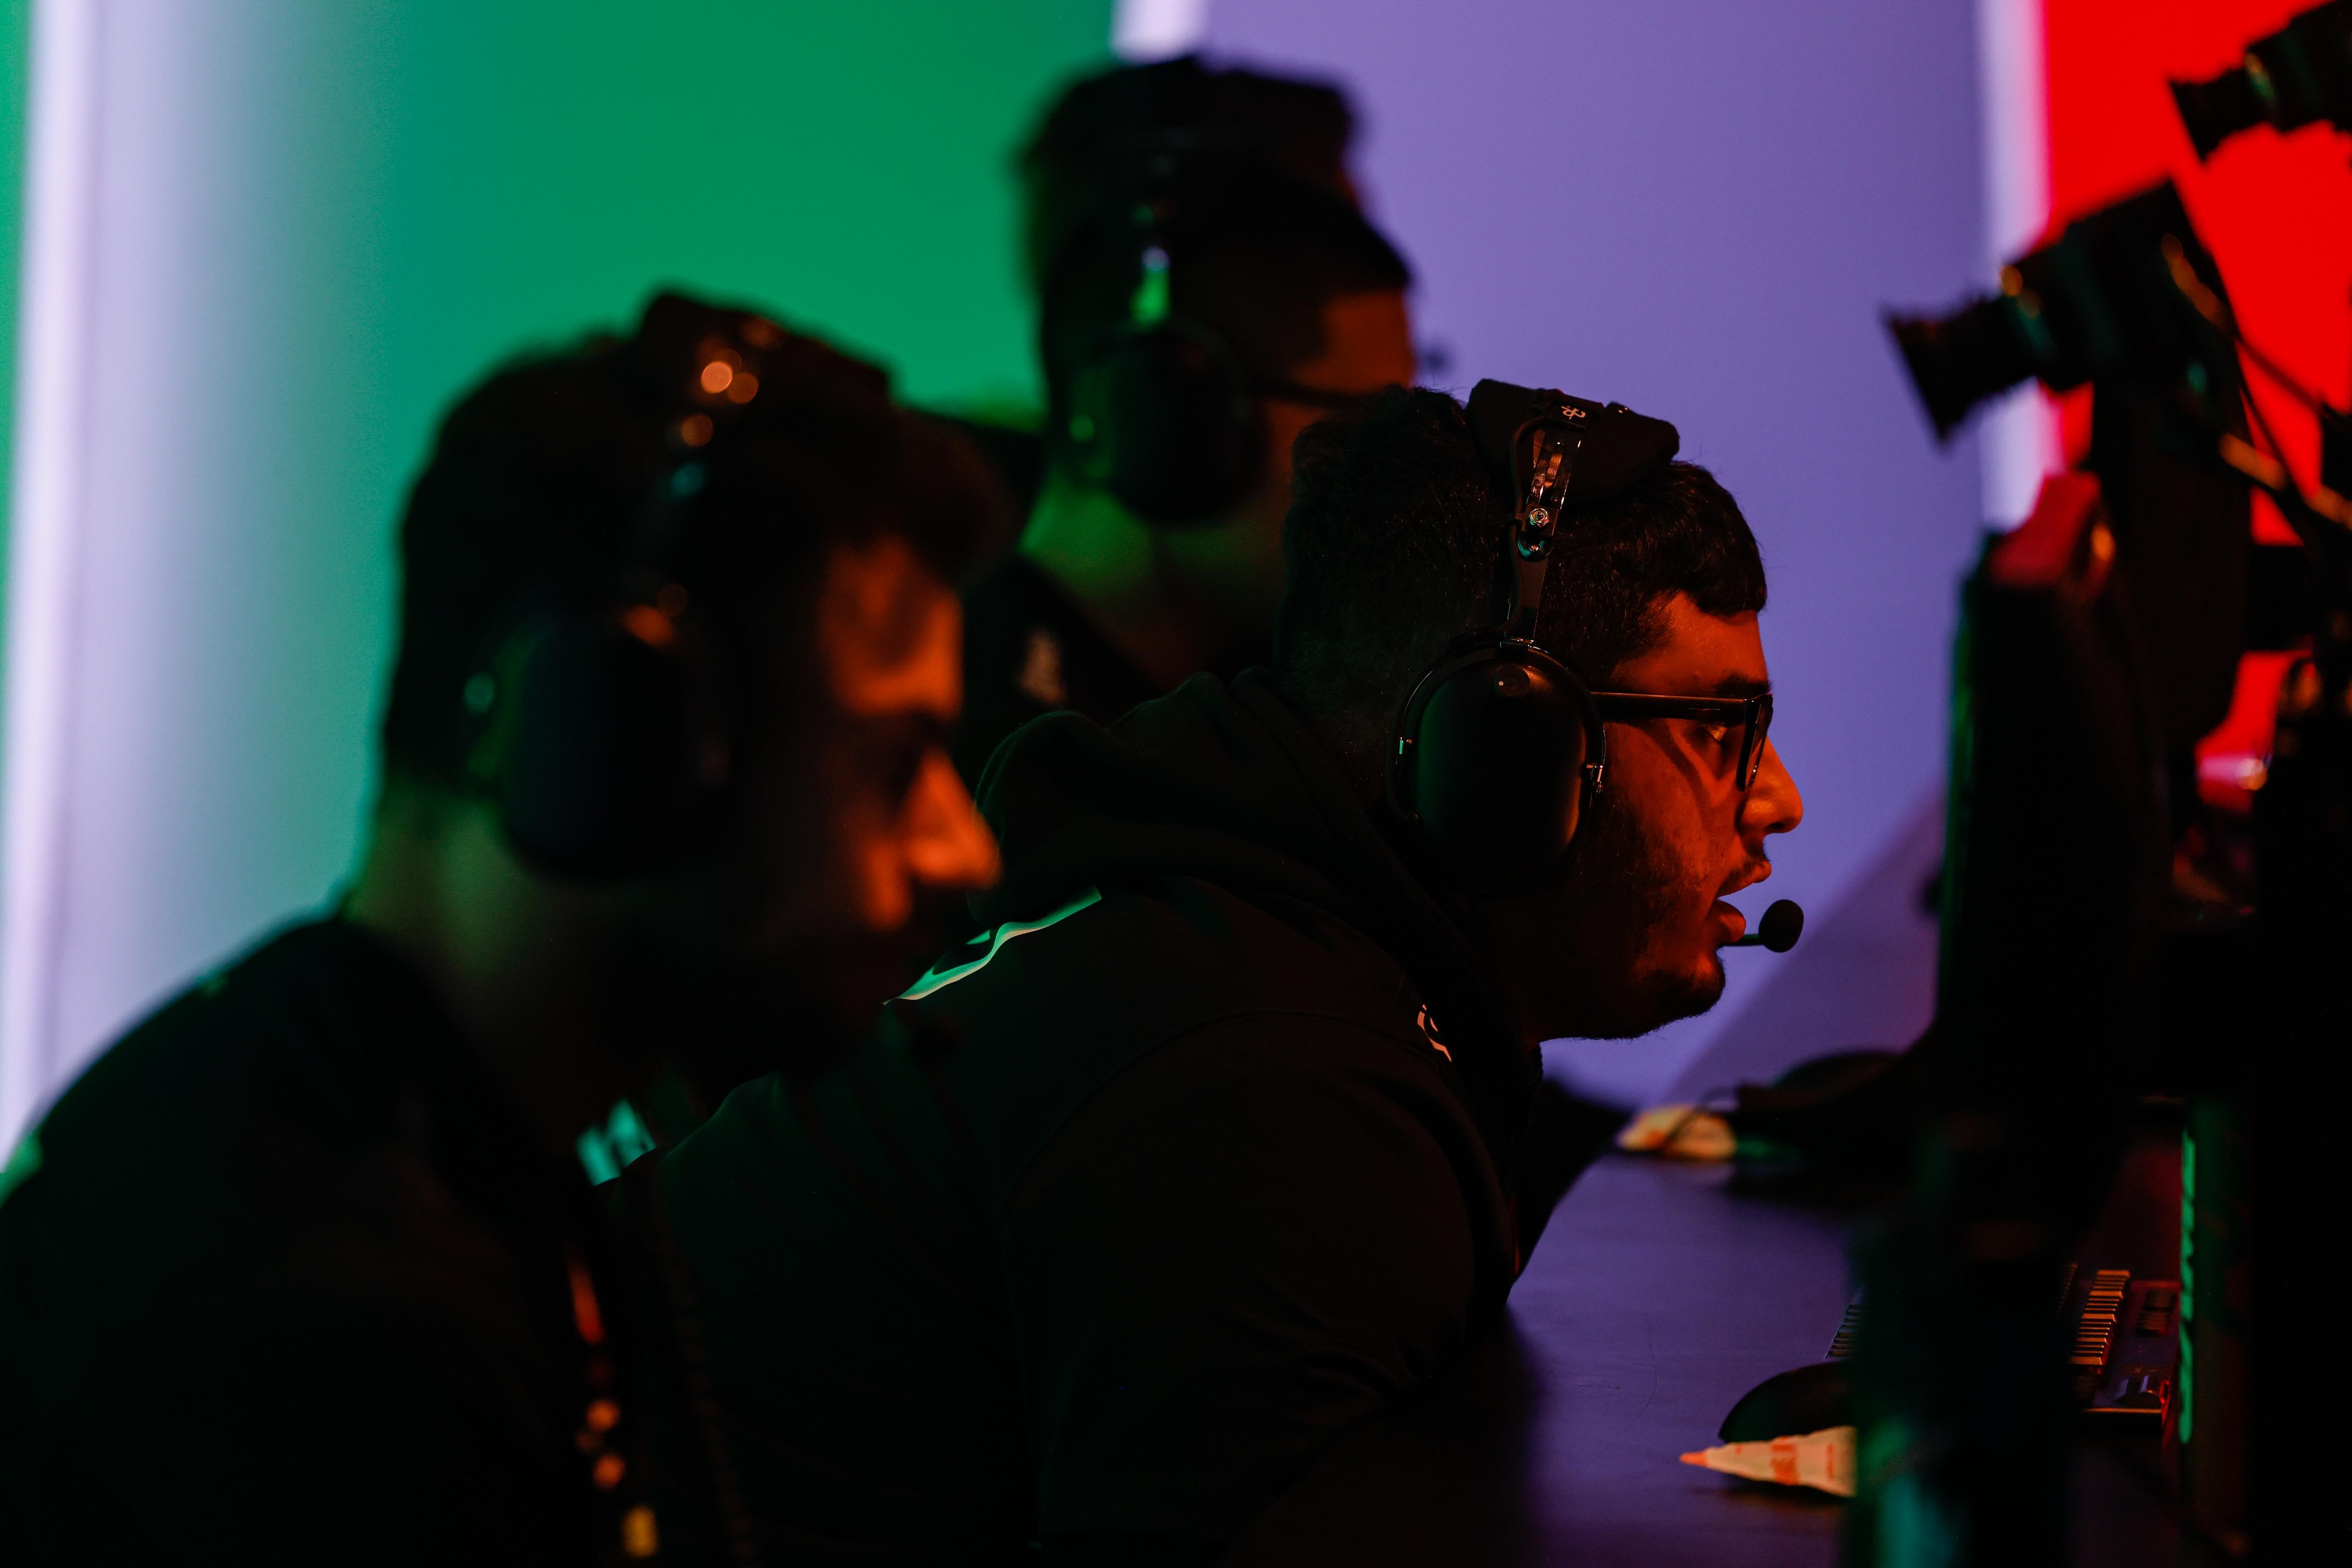 Esports makes big return to DFW with 2023 Call of Duty League